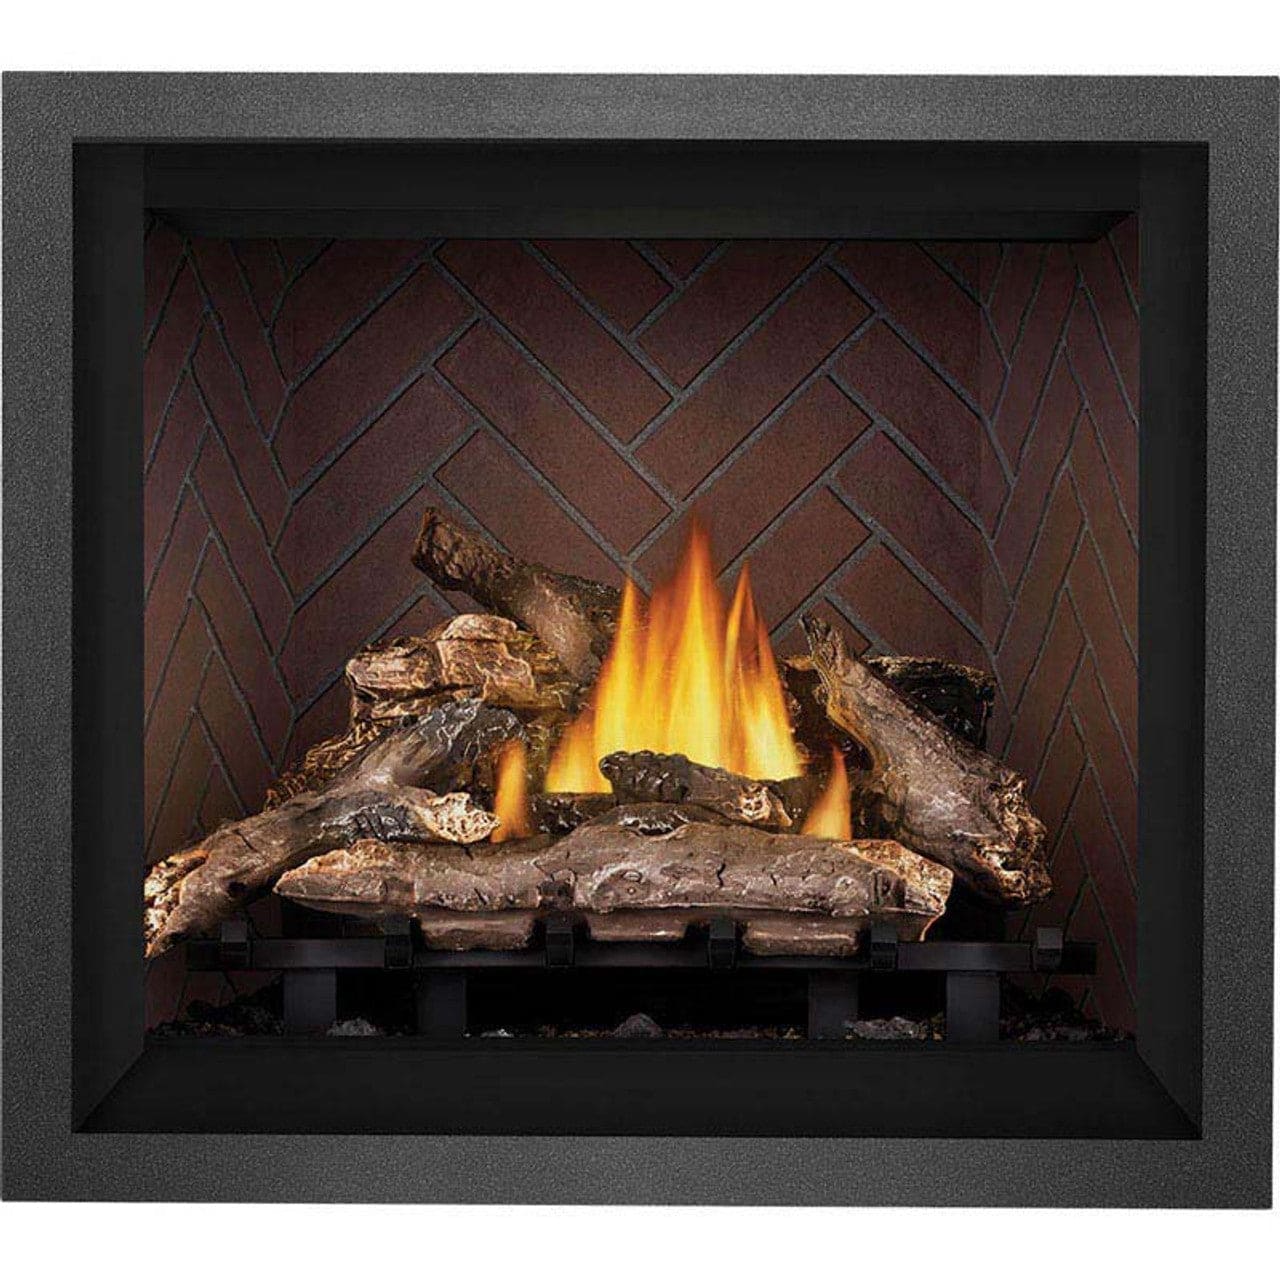 Napoleon Elevation 36 Direct Vent 36" Natural Gas Fireplace - E36NTE - Chimney Cricket